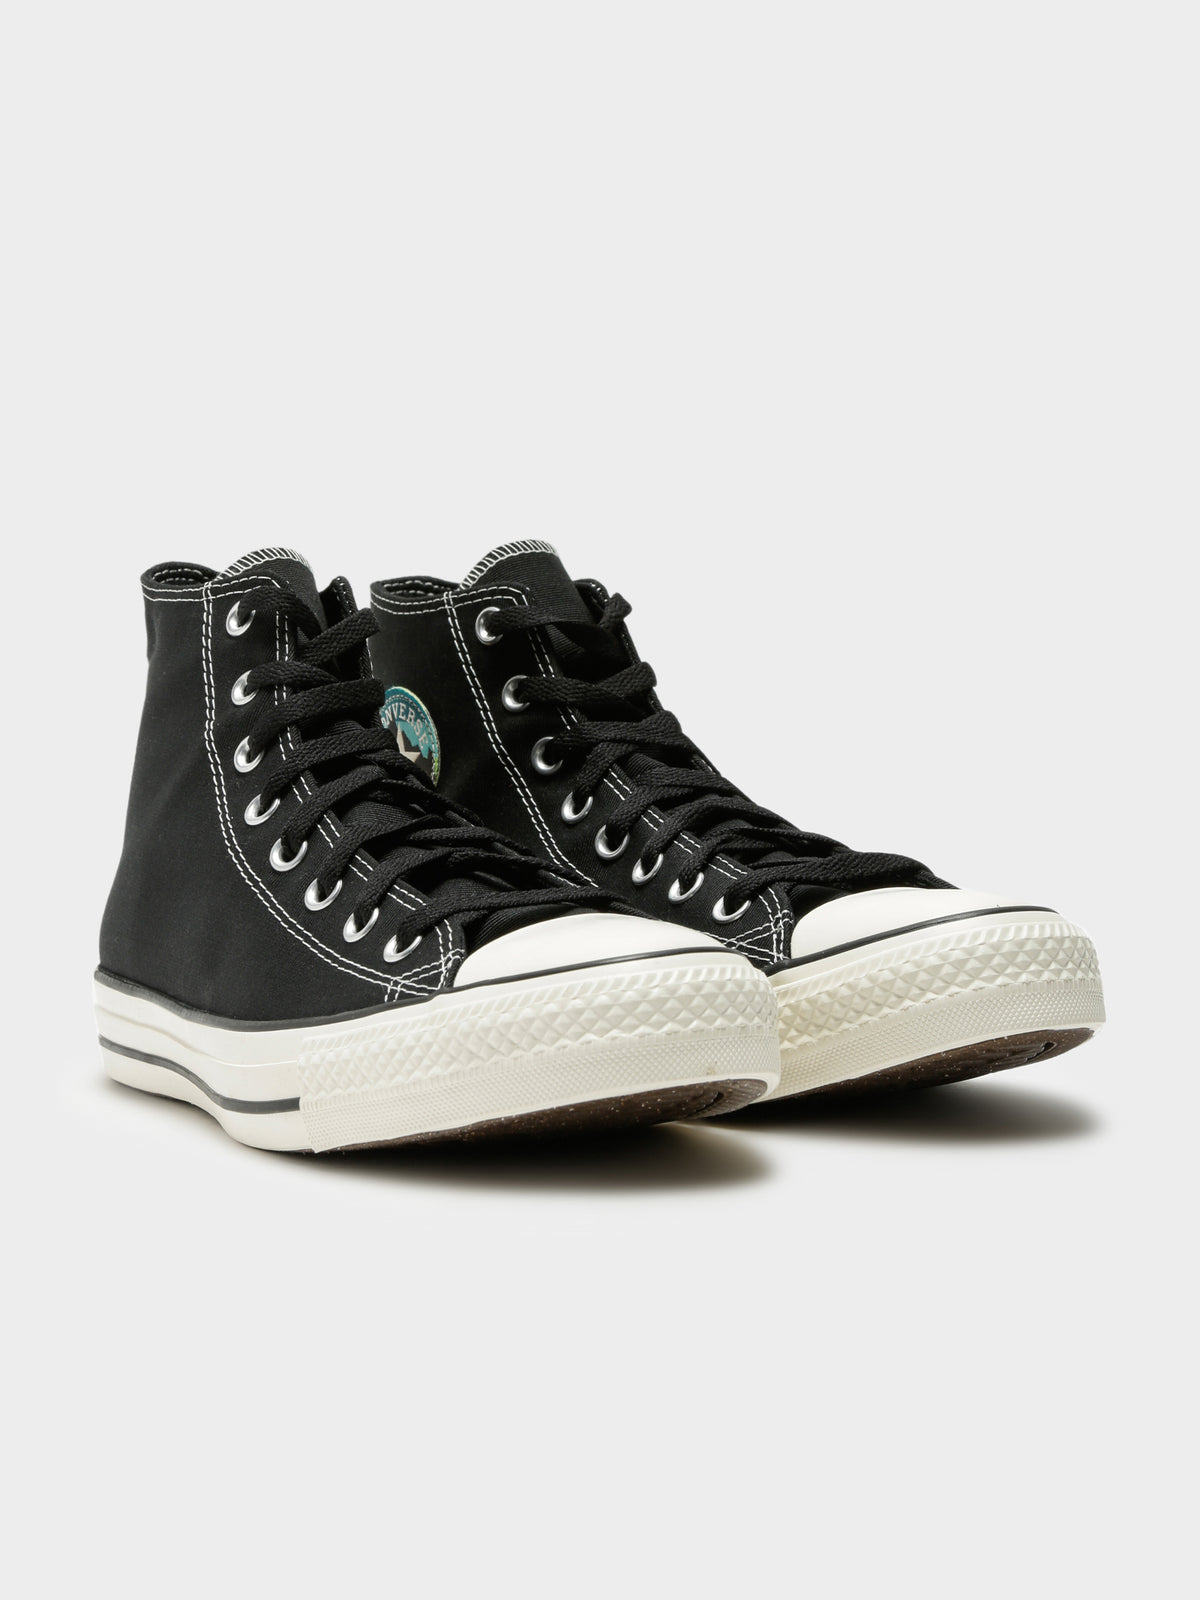 Unisex Chuck Taylor All Star National Parks High Tops